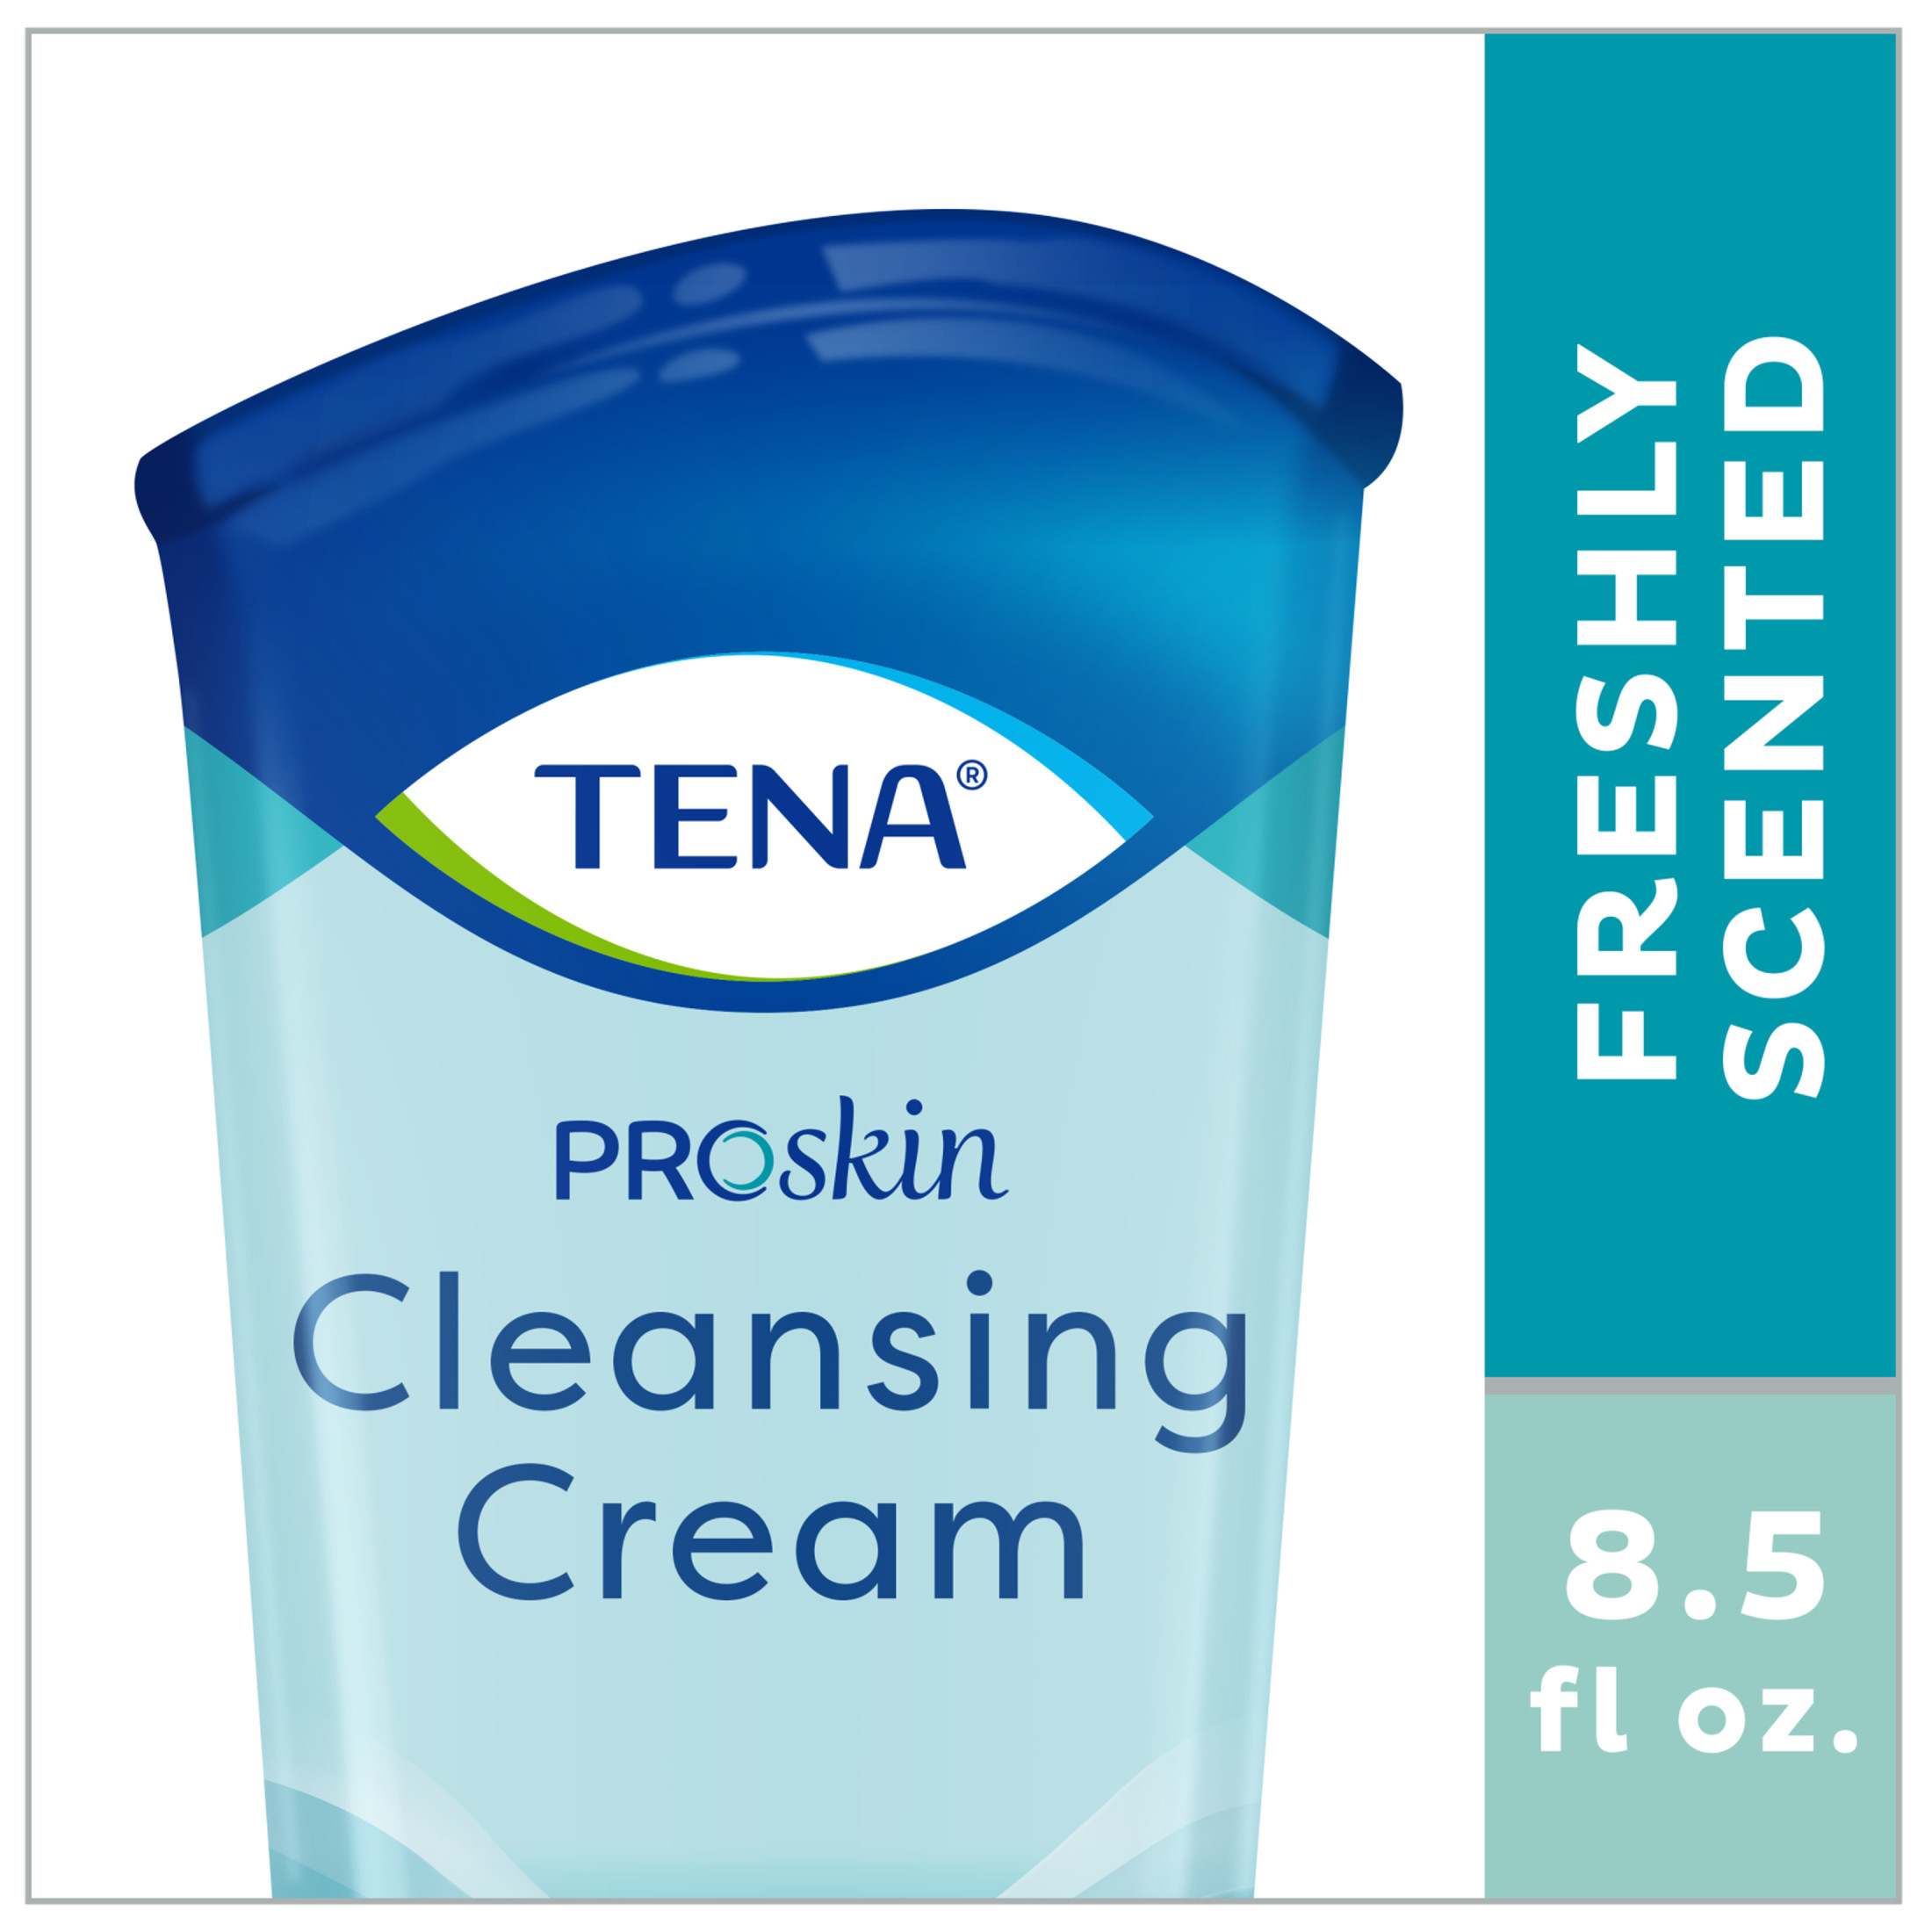 Tena ProSkin Cleansing Cream promotes skin health by gently cleansing, moisturizing and soothing skin. No rinse formula makes bathing easy. - image 1 of 7